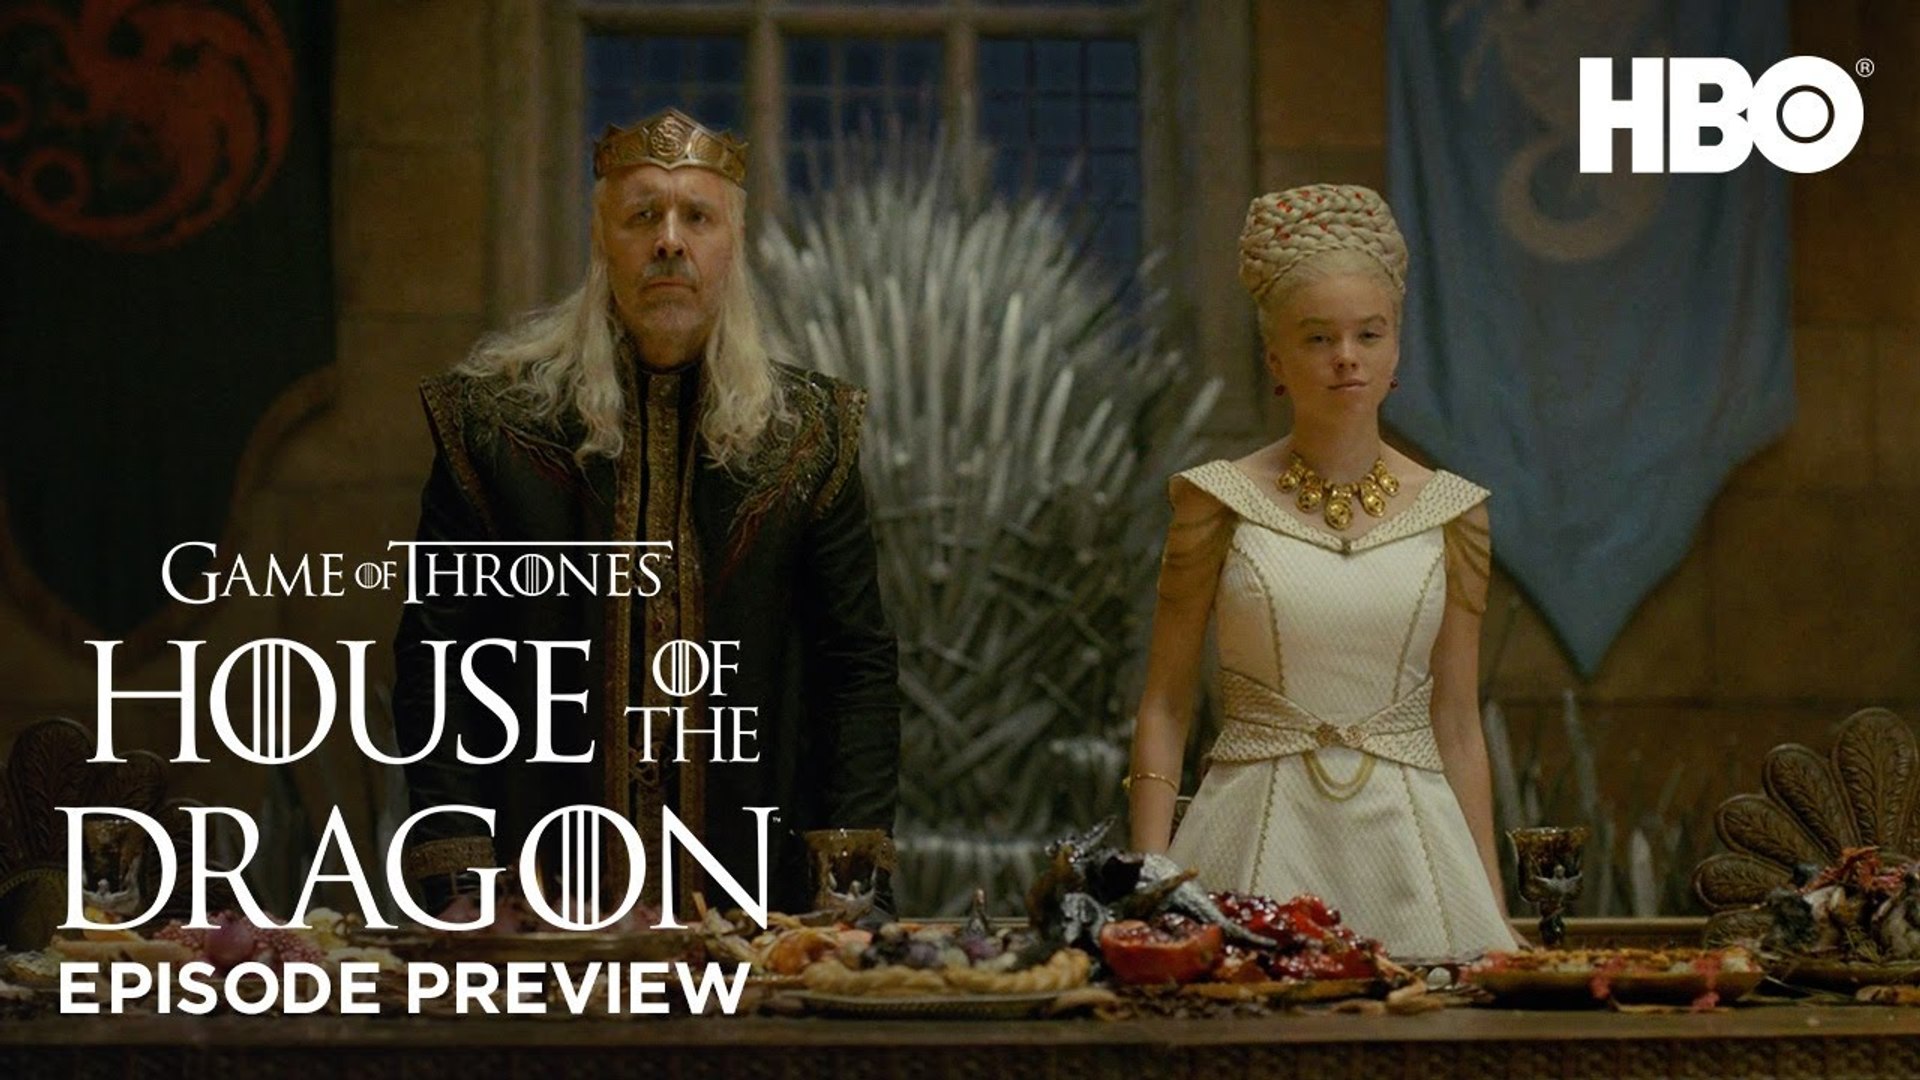 Season 1 Episode 5 Preview House of the Dragon (HBO) - video